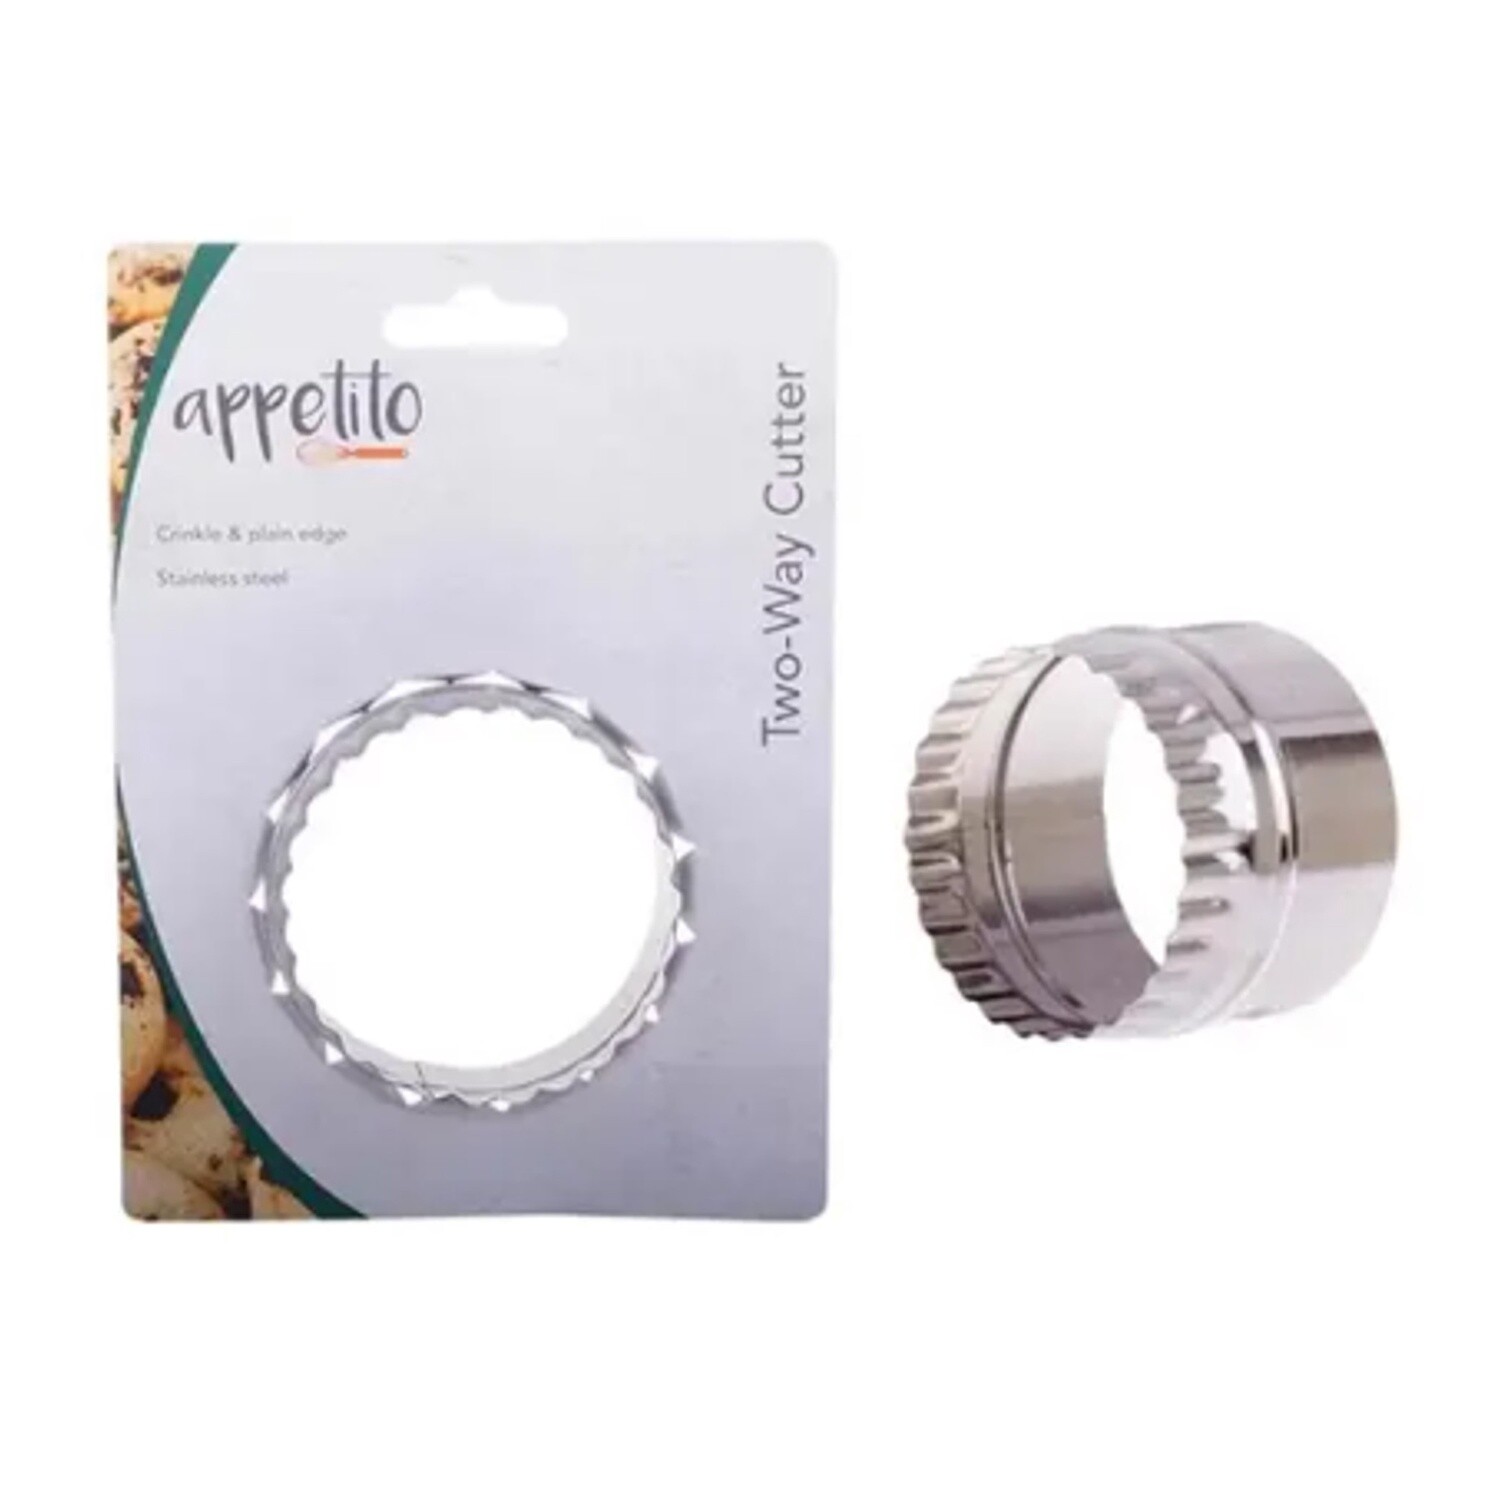 Appetito 2 Way Cookie Cutter